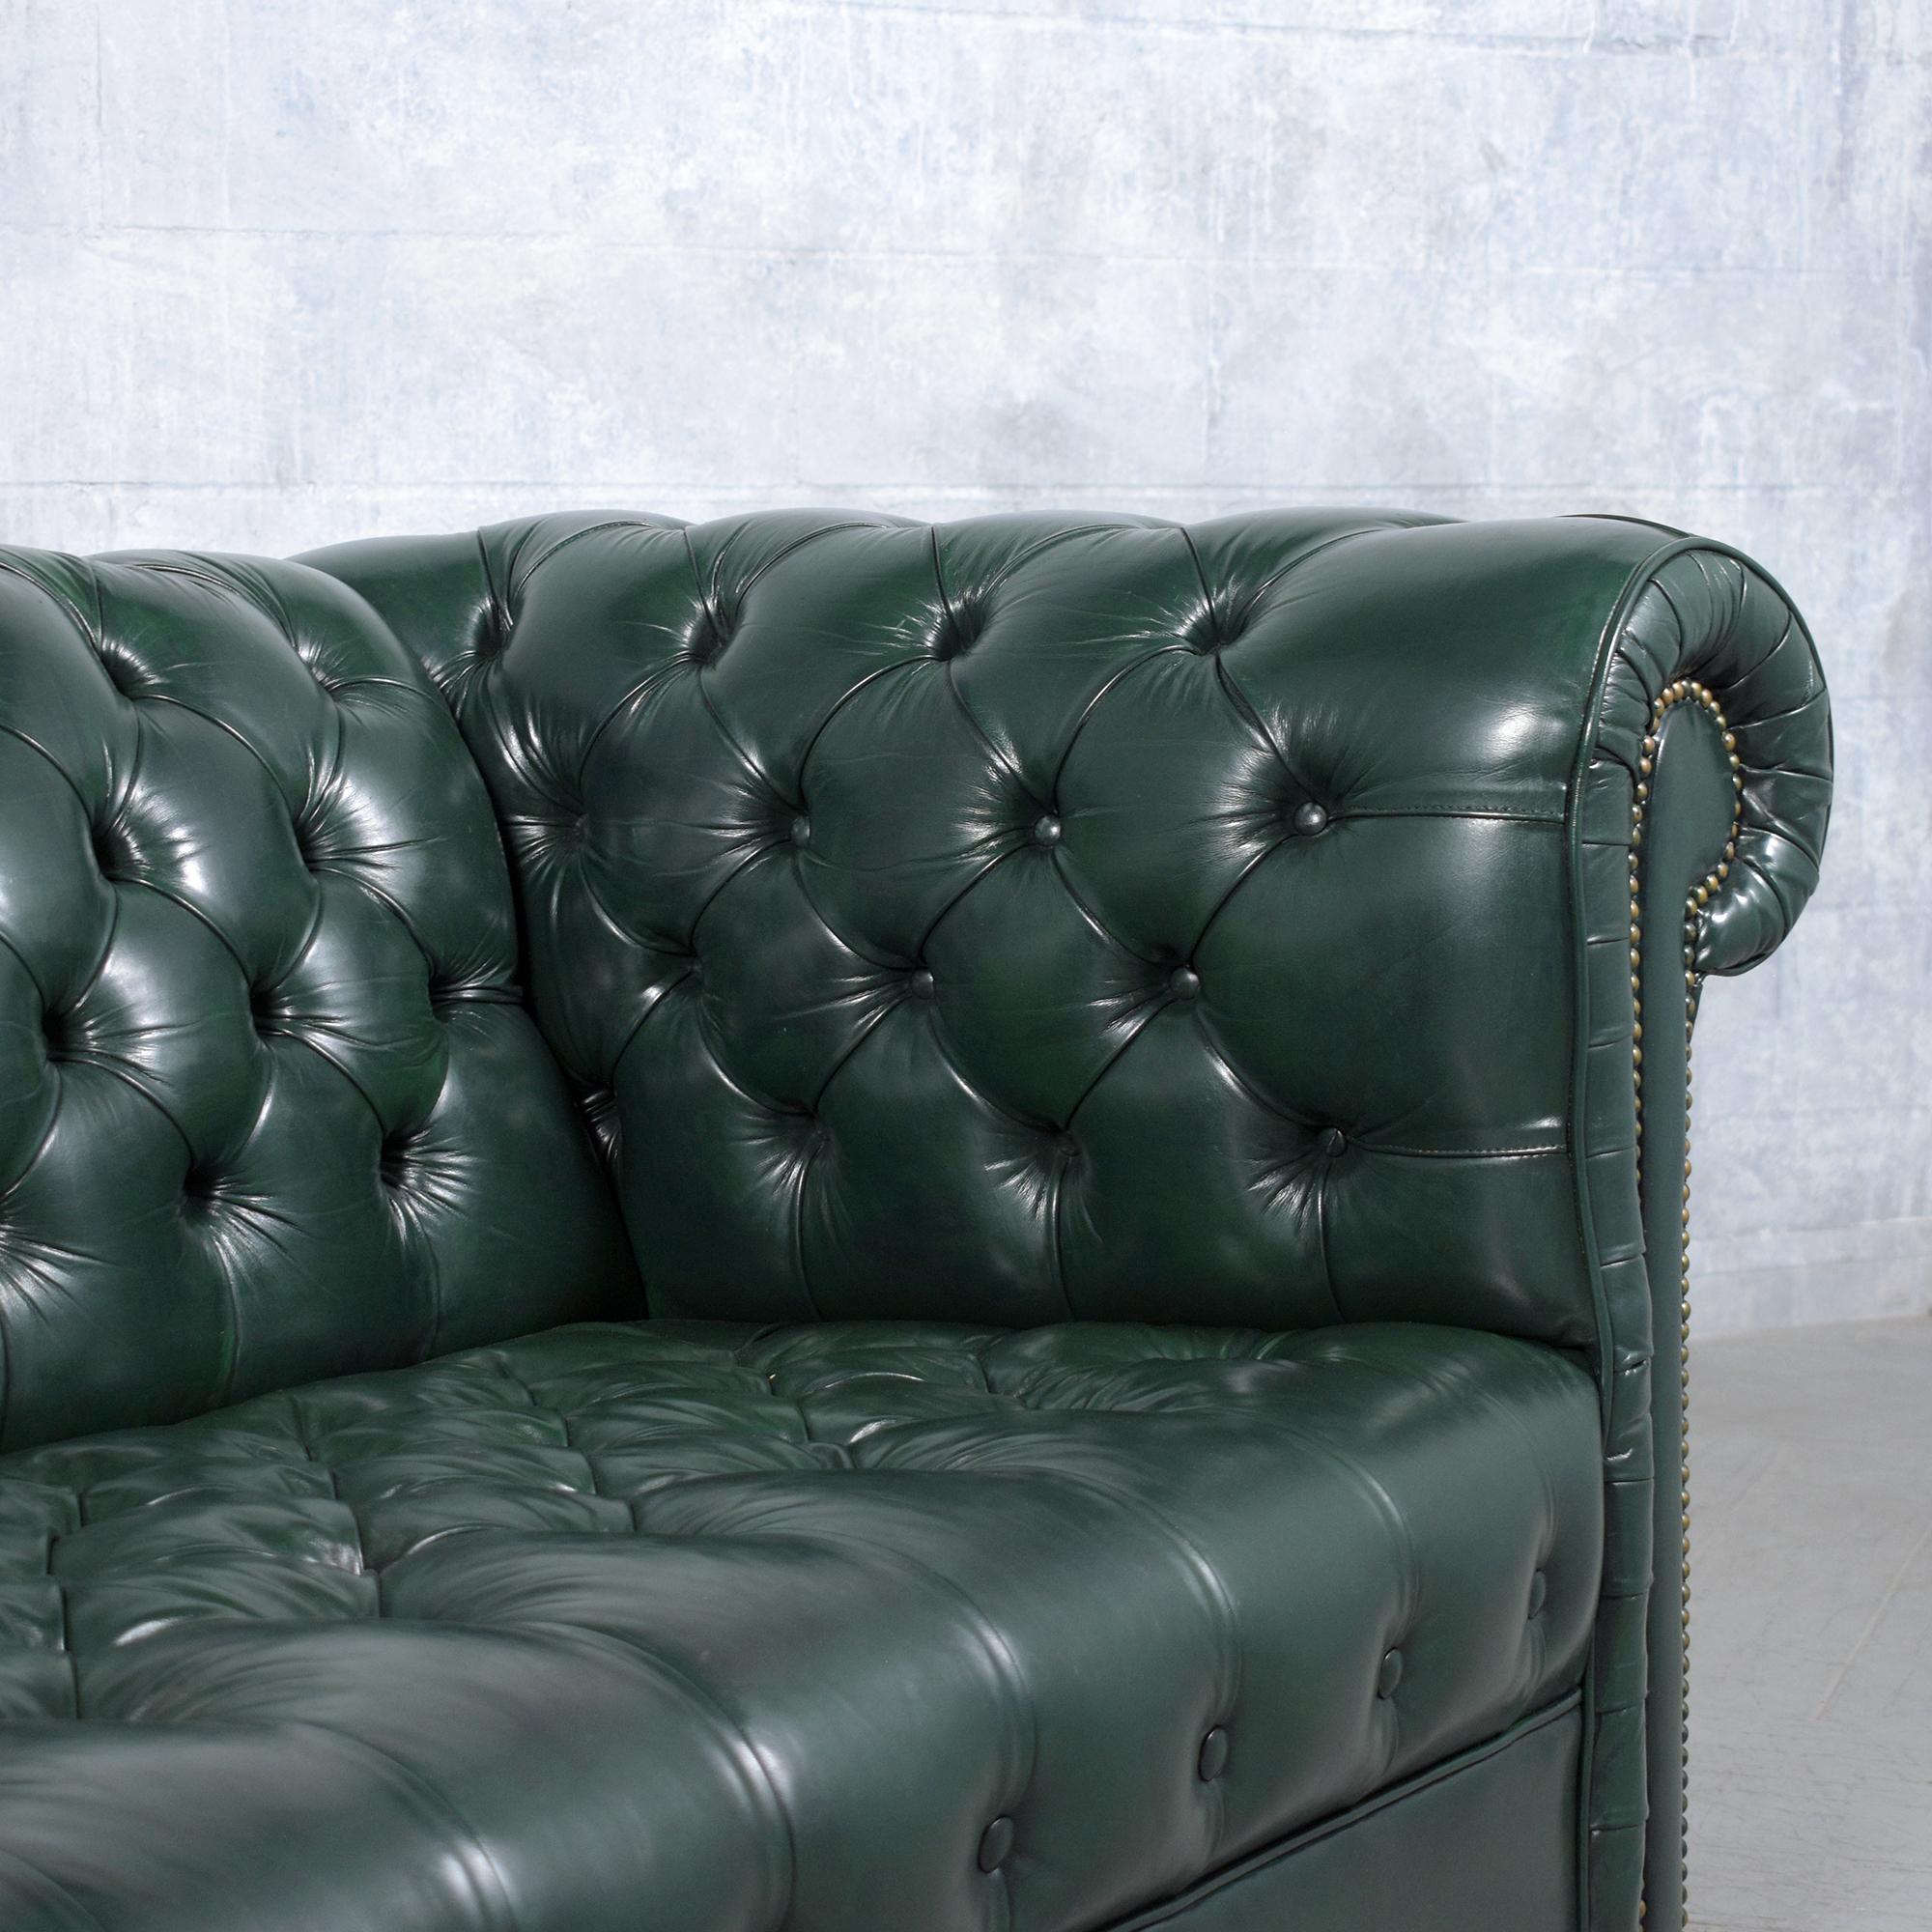 1970s Vintage Chesterfield Sofa: Emerald Green Leather with Elegant Carved Legs 5